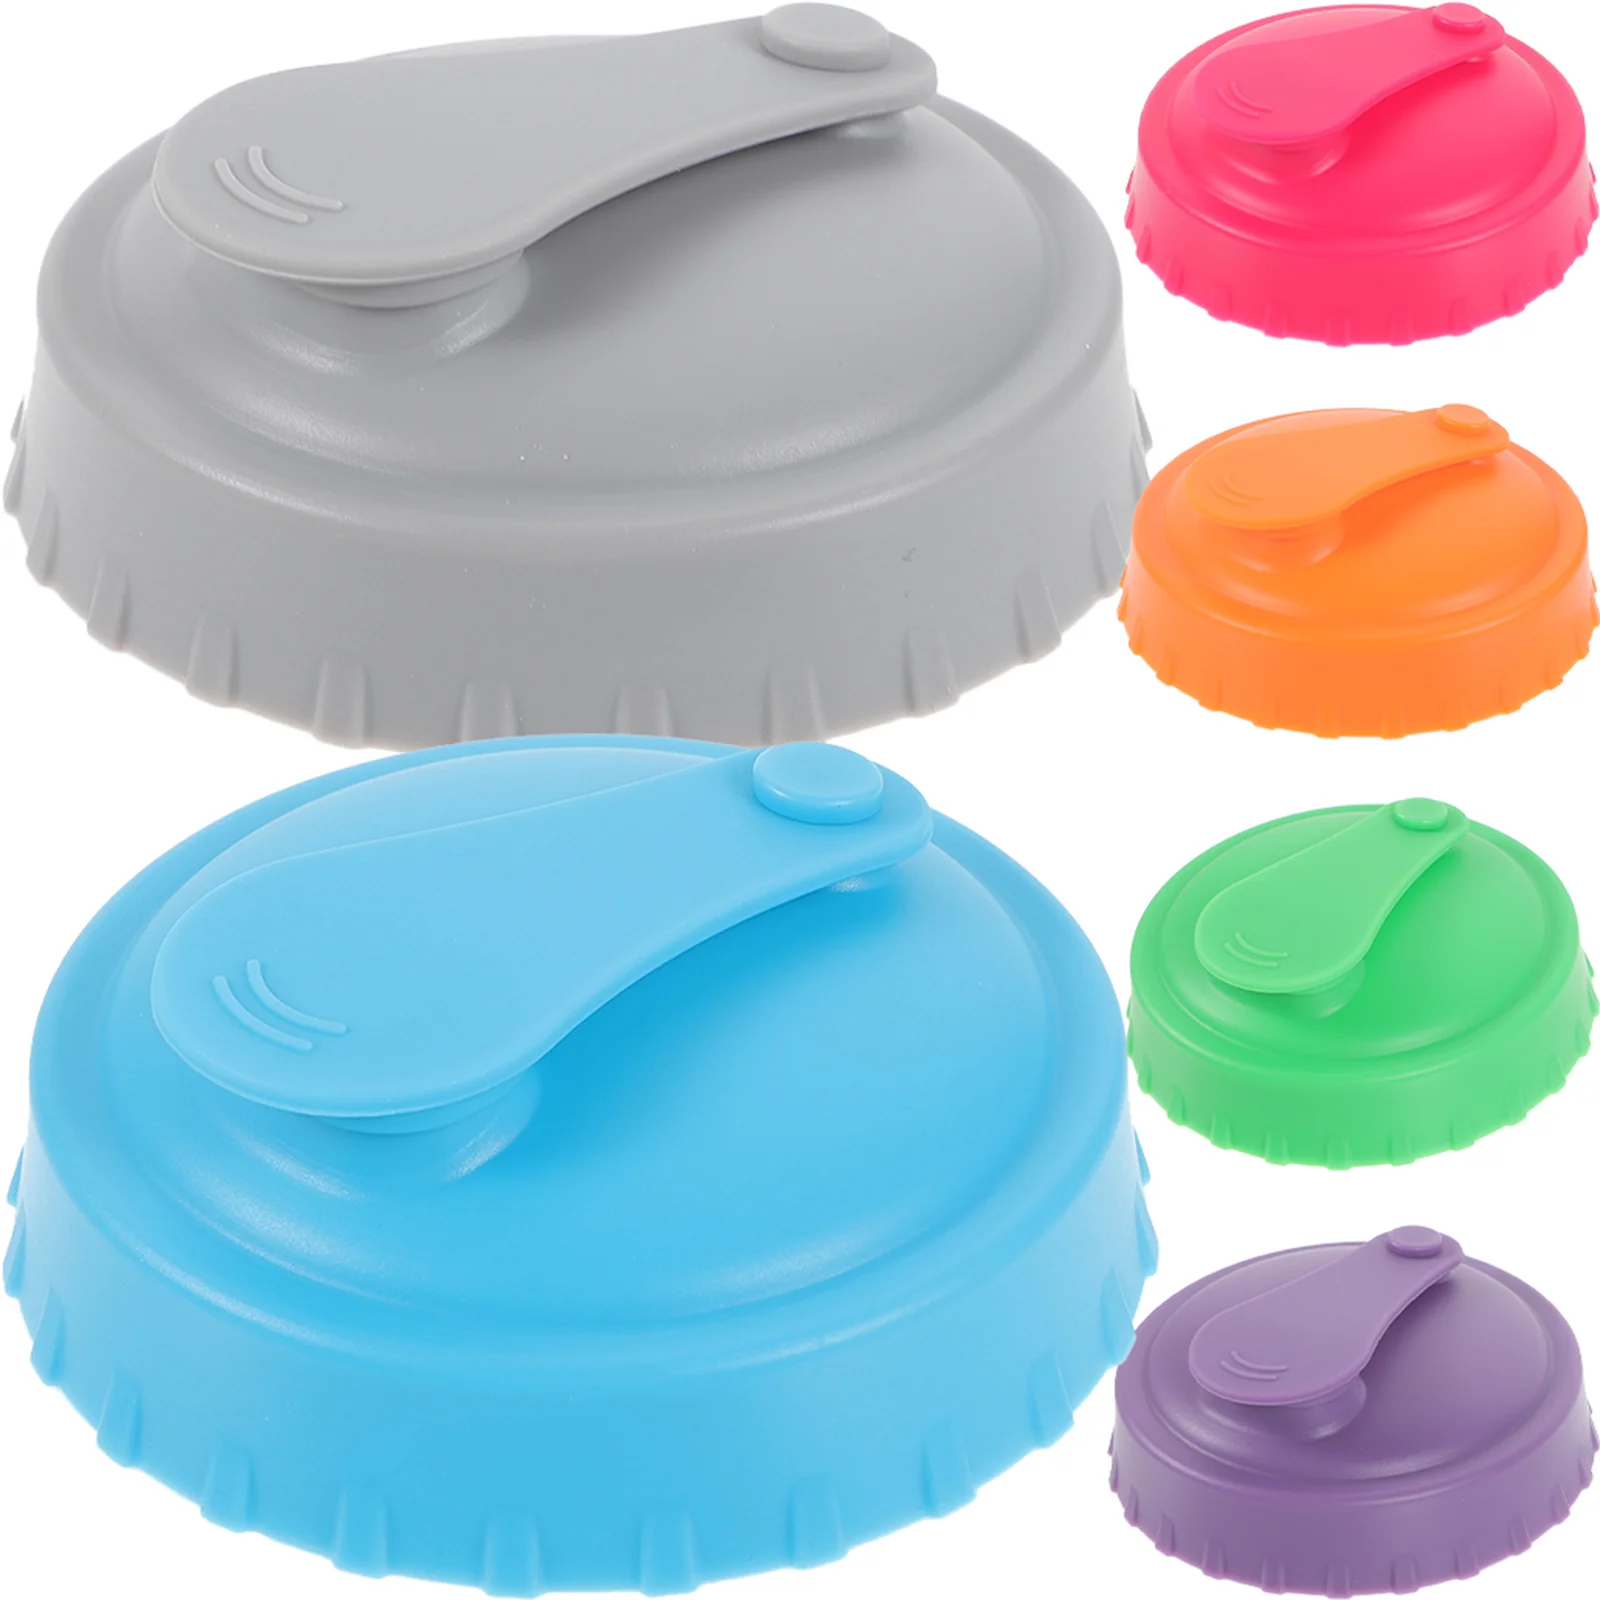 

6 Pcs Silicone Can Lid Leakproof Cup Cover Soda Can Lids Beer Can Sealing Lids Silica Gel Cola Can Lids Soda Can Cover